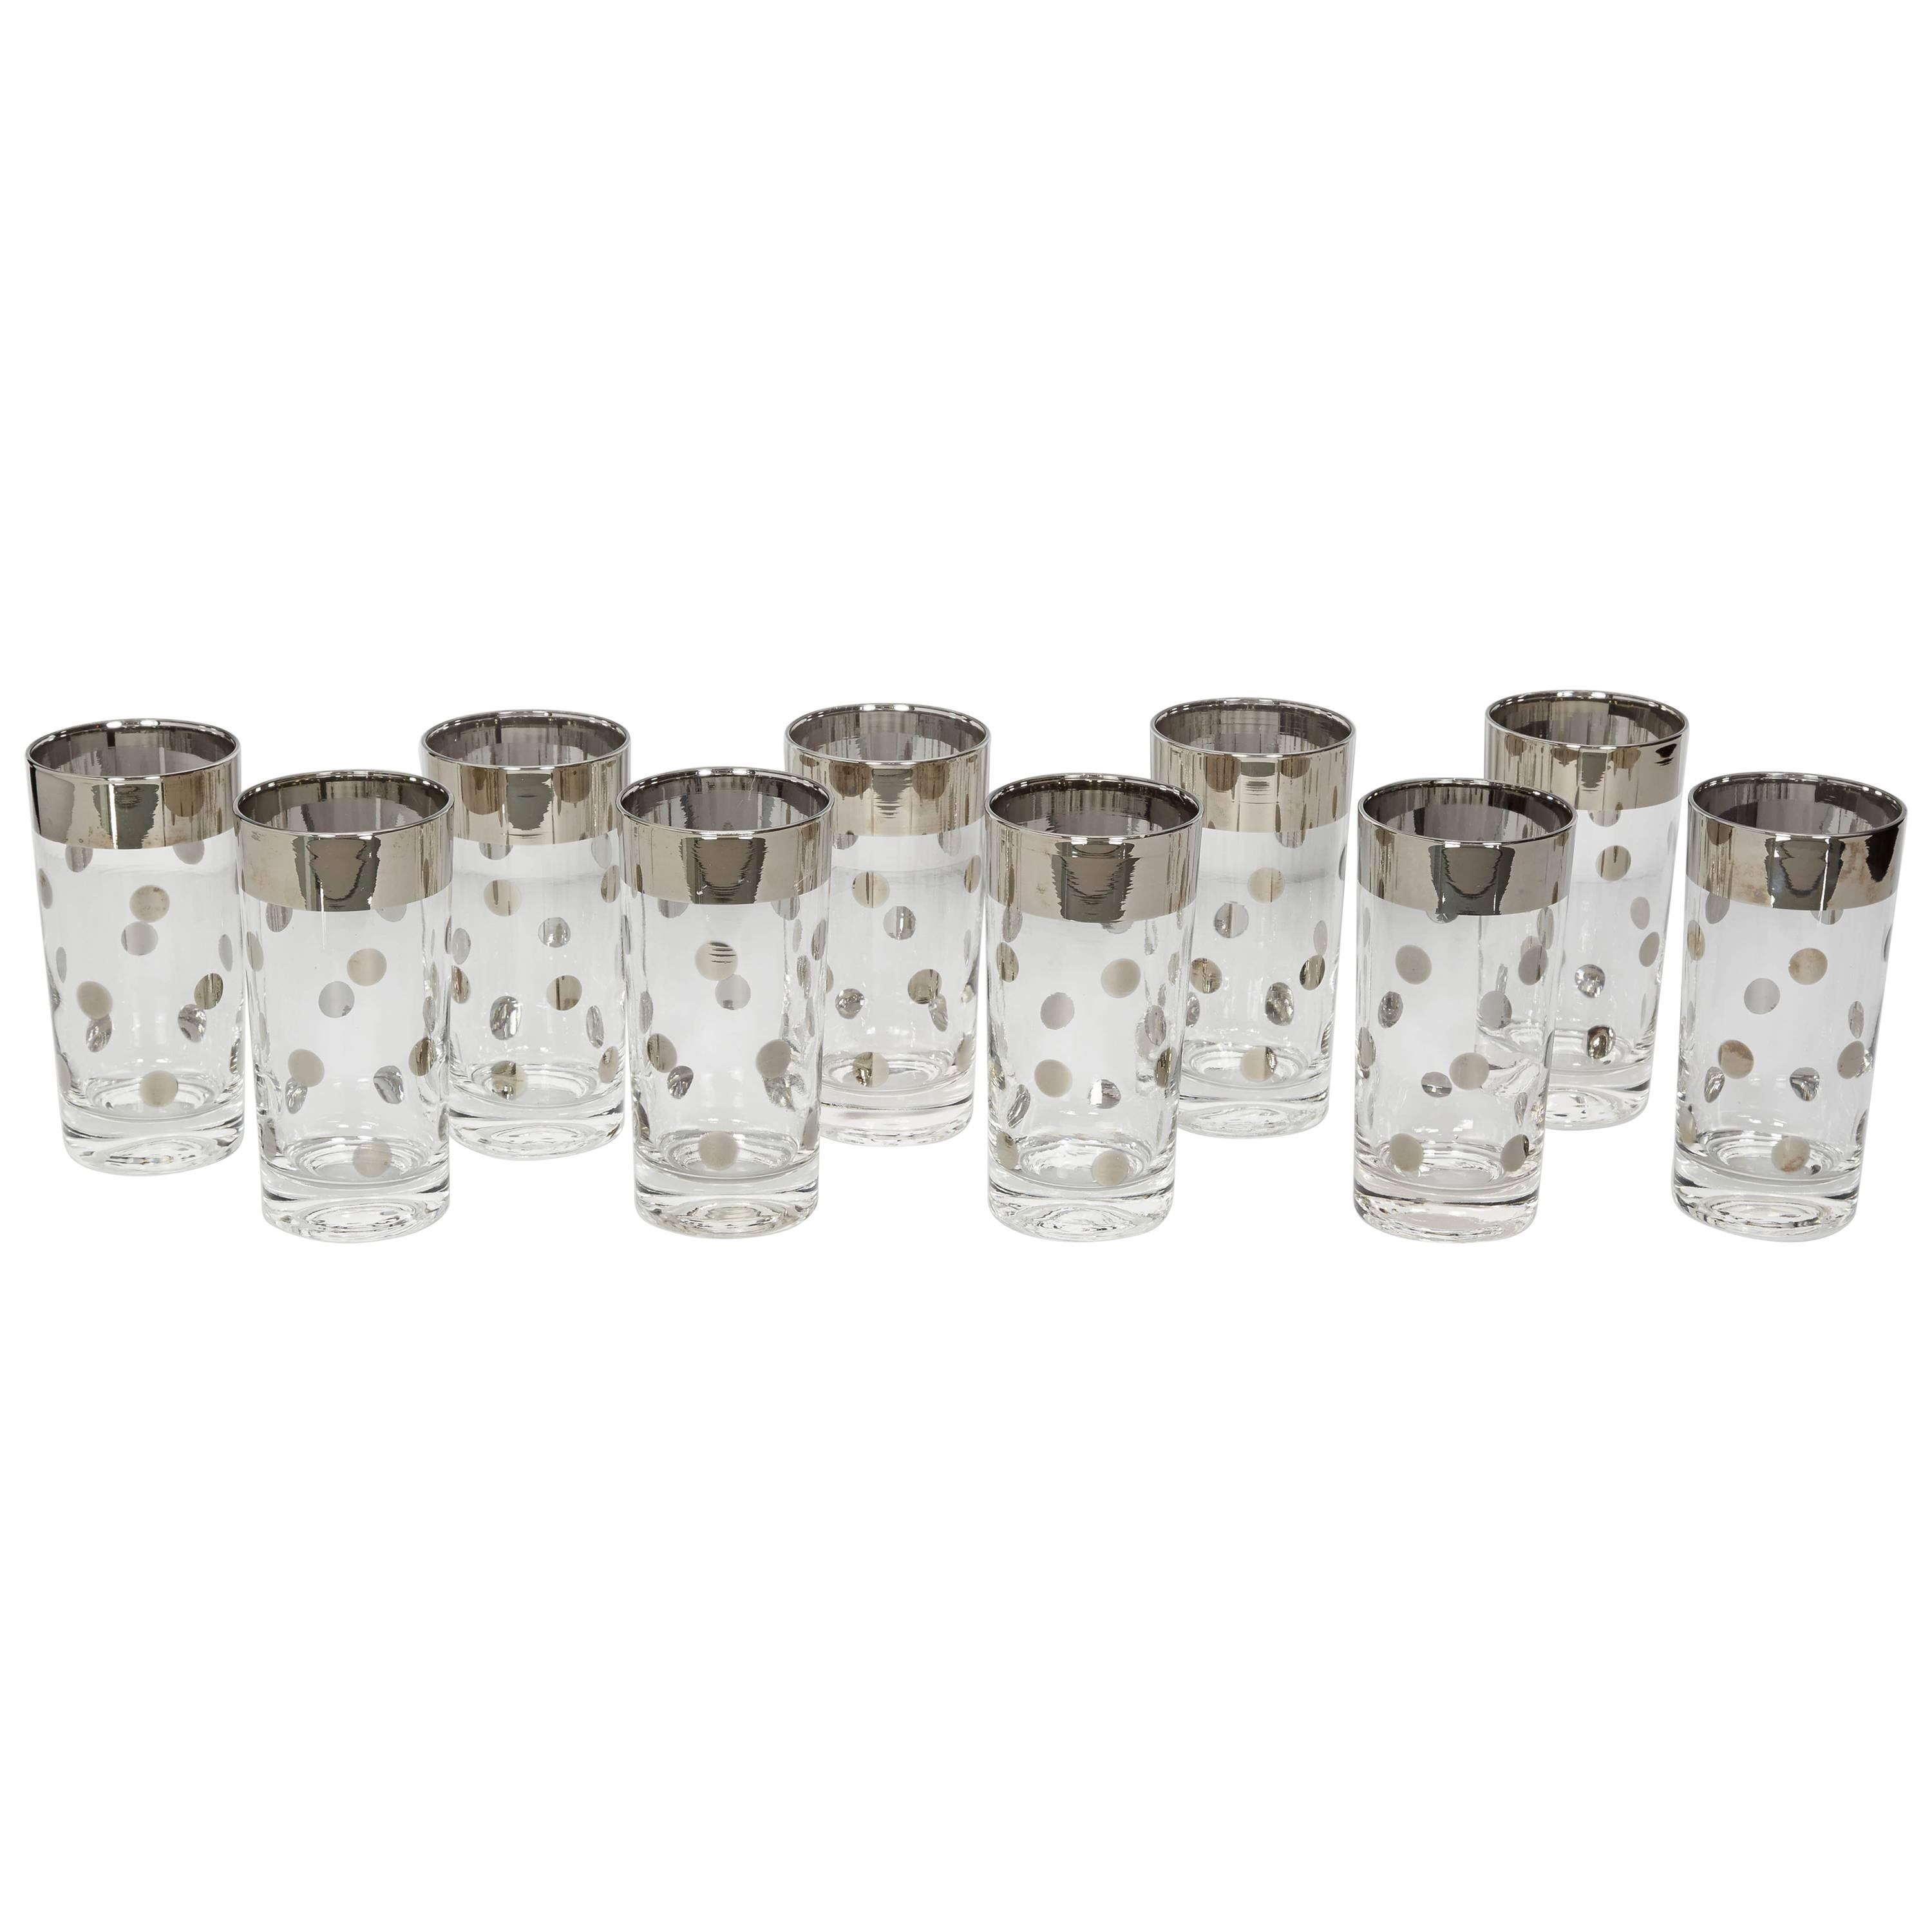 Mid-Century Modern barware glasses consisting of ten tall tumbler glasses. The glasses have a silvered gunmetal trim detail with polka dot design. Adds a smart and cheerful addition to any bar set or dinnerware set.